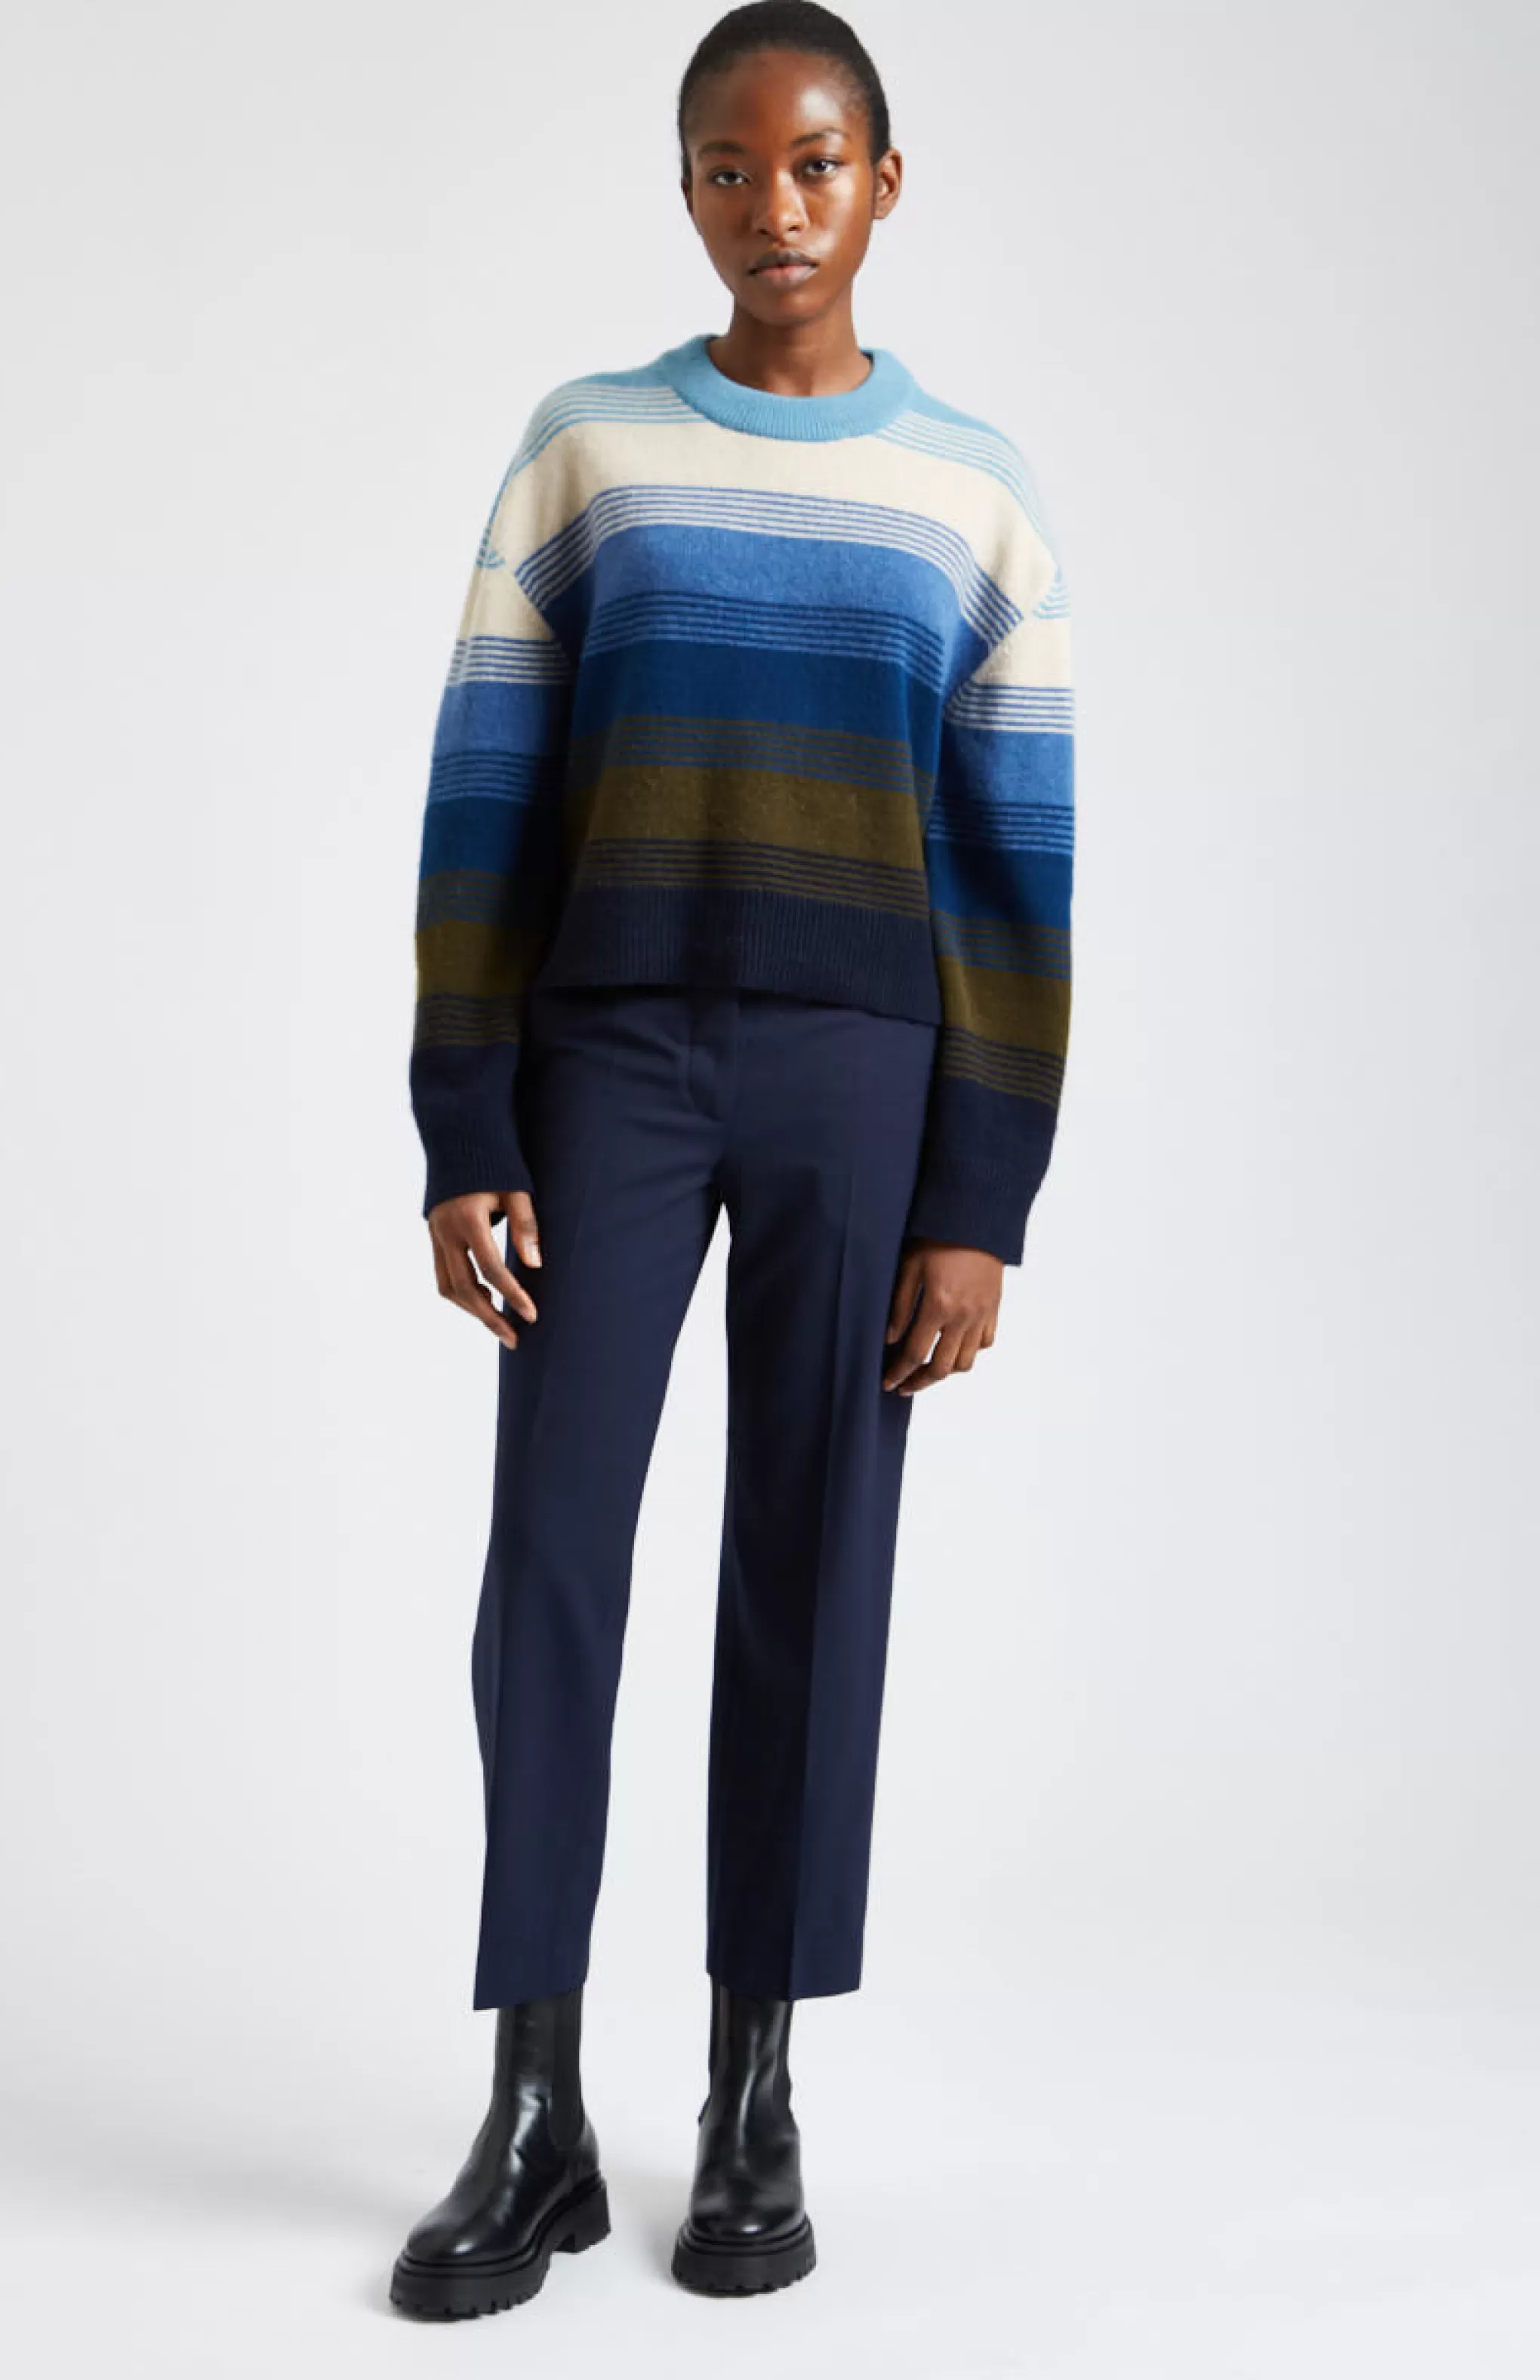 Hot Brushed Lambswool Jumper With Allover Stripe In Blue Smoke Men/Women Medium Weight Knits